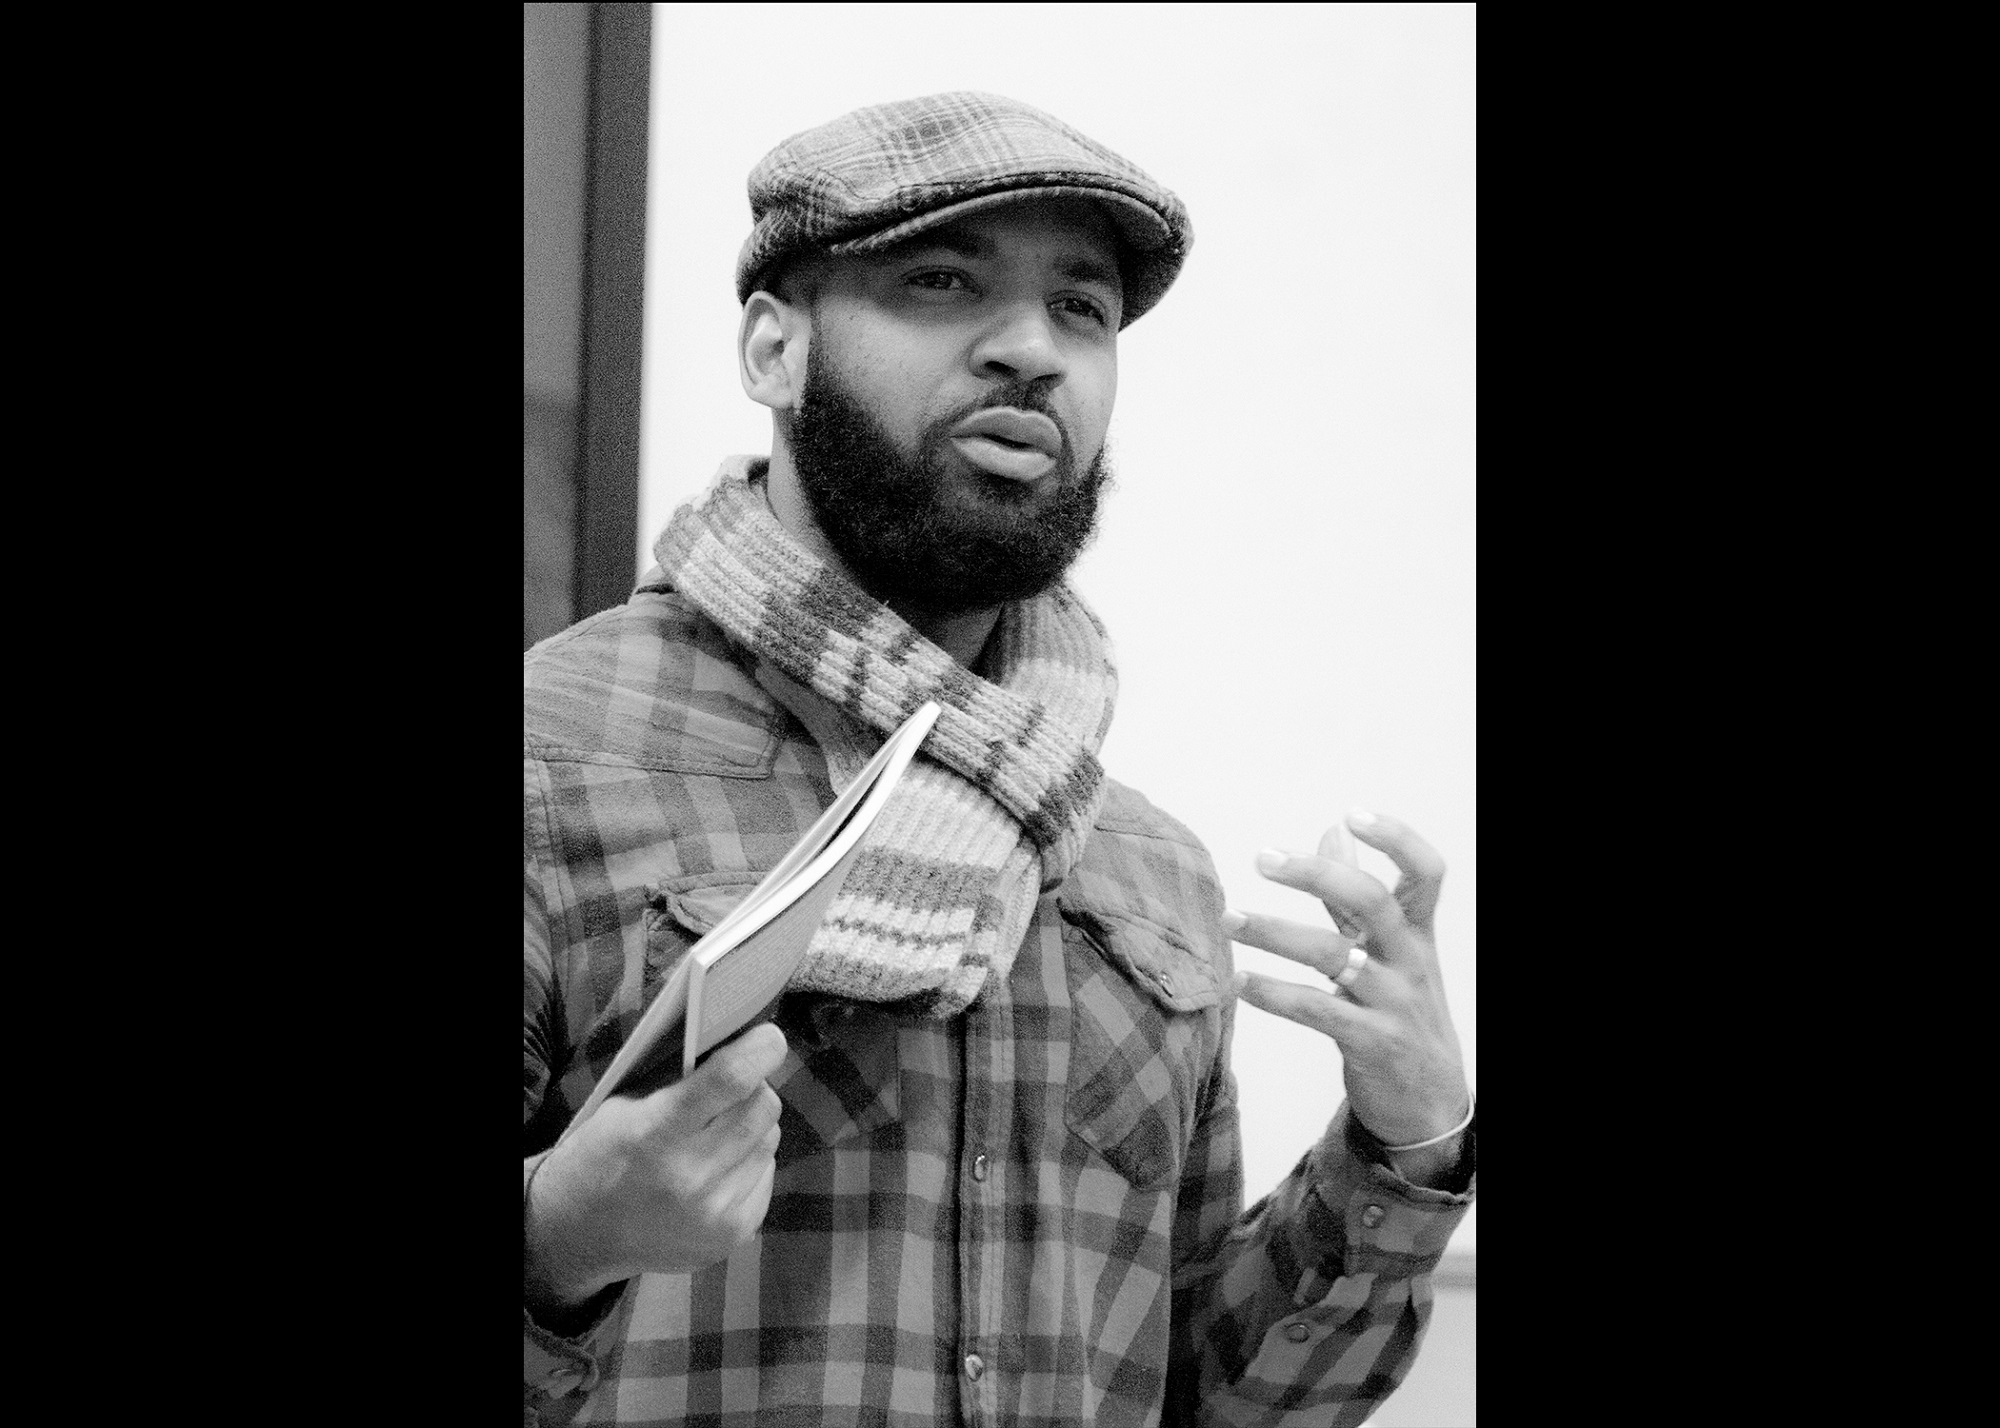 Poet, author and University of Mississippi assistant professor Derrick Harriell. (Courtesy of Derrick Harriell)